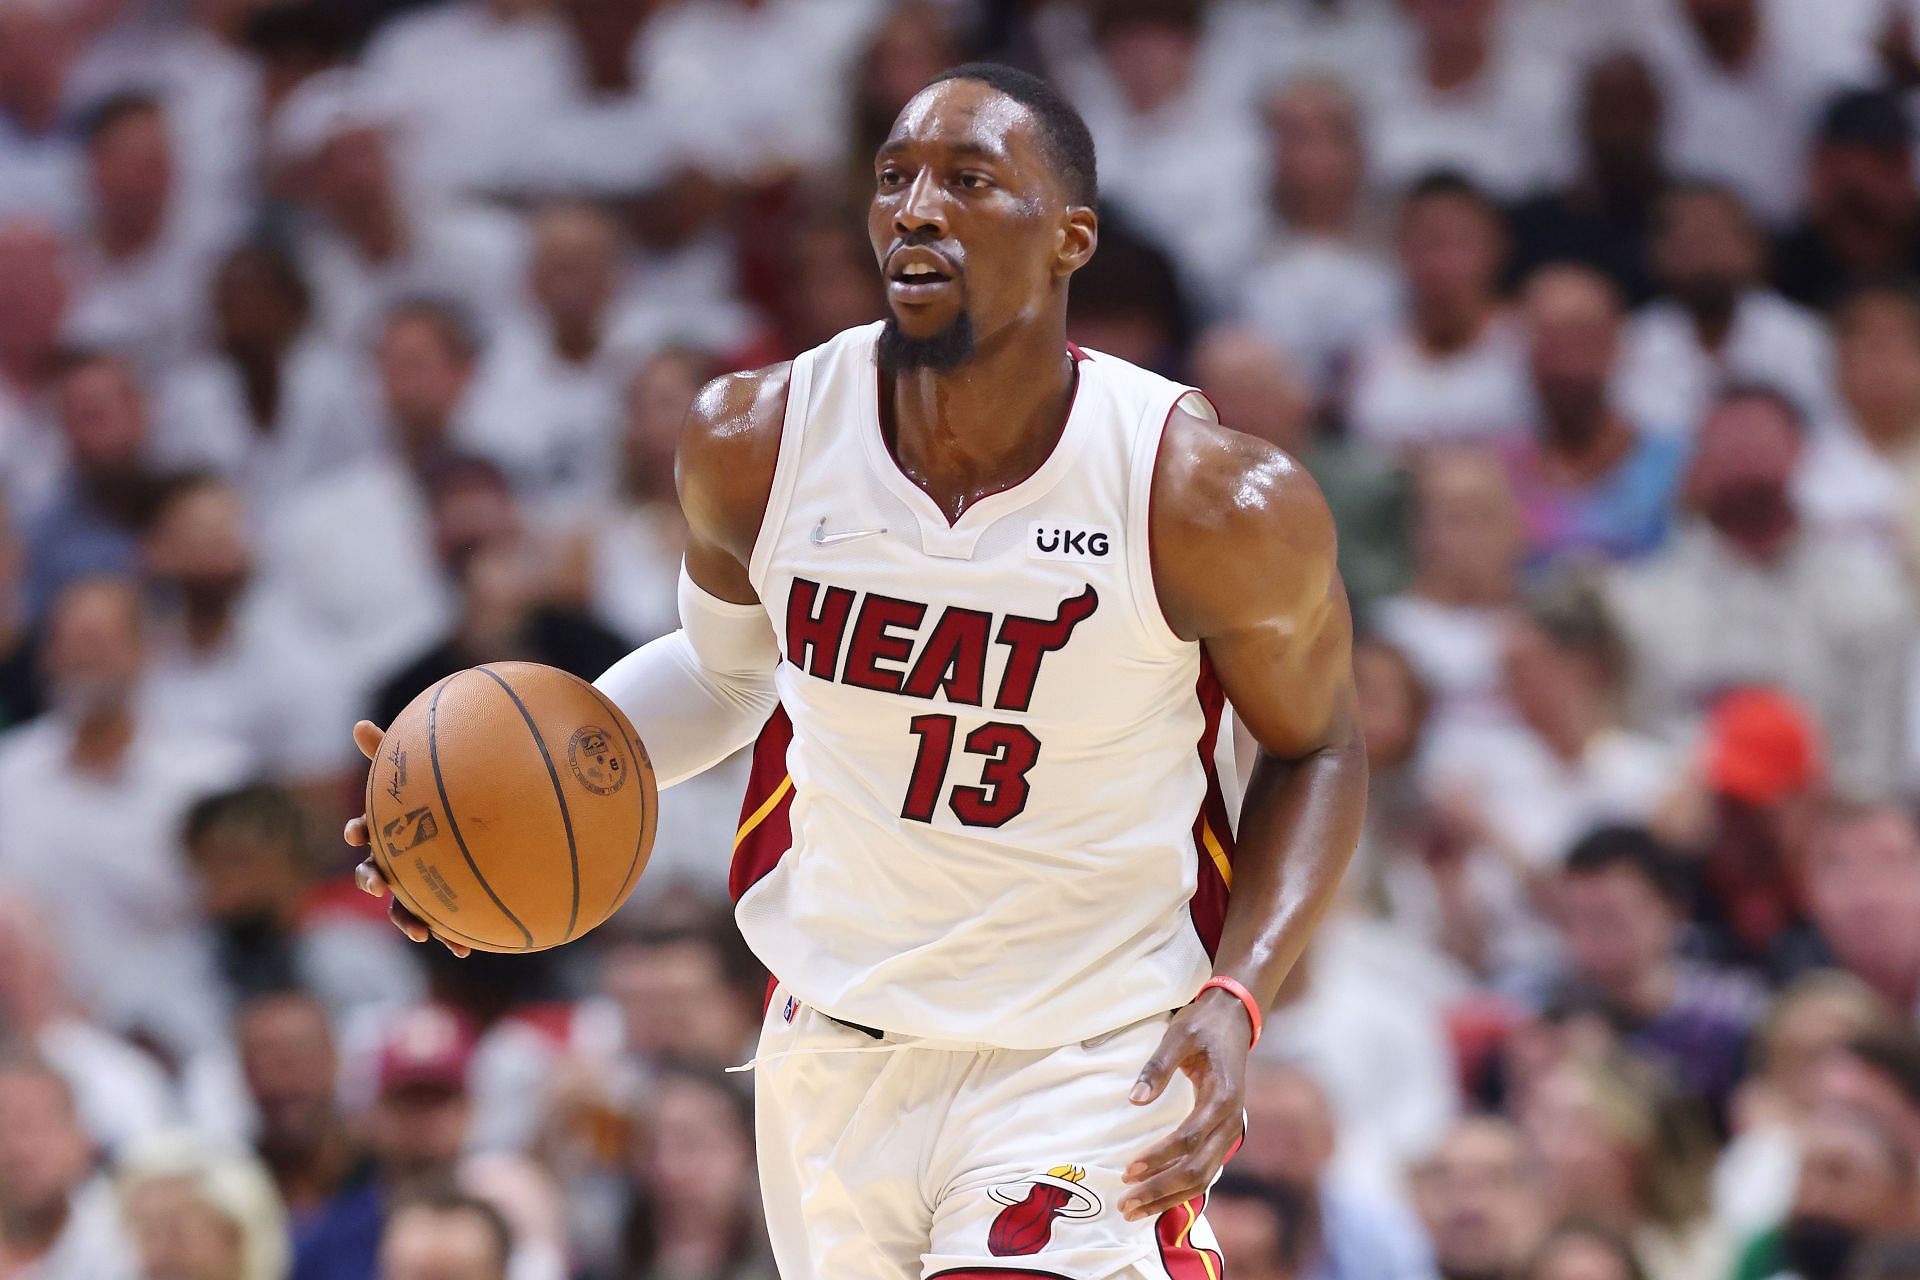 Bam Adebayo along with PJ Tucker, Victor Oladipo and Max Strus put the Heat on their back and took a road-game win in Boston on Saturday.